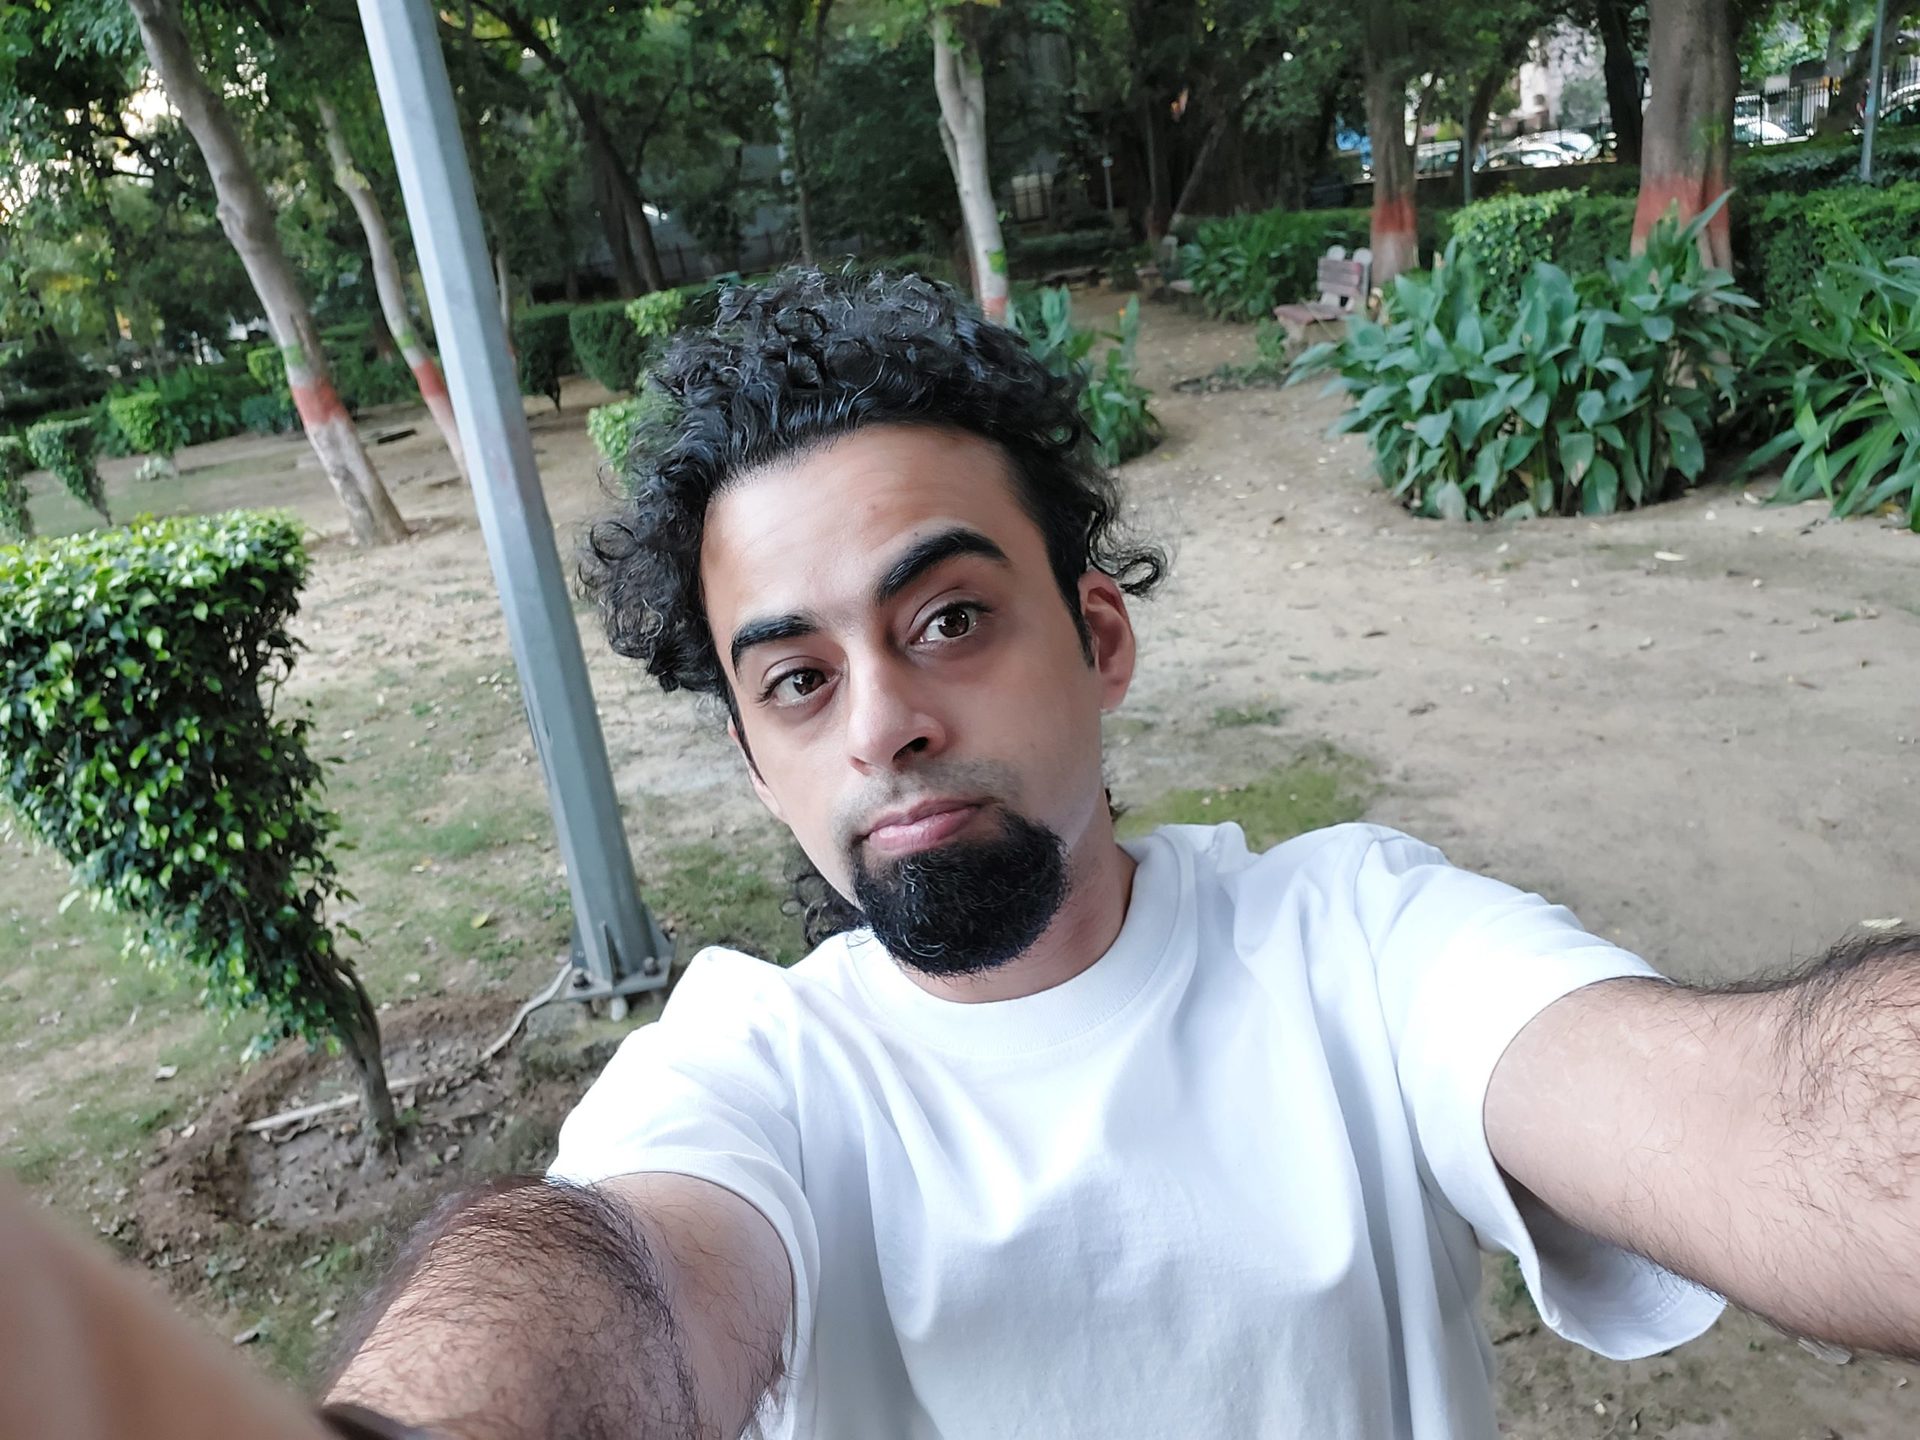 Samsung Galaxy M52 camera sample selfie ultra wide of a man with dark curly hair and a beard wearing a white t-shirt outdoors